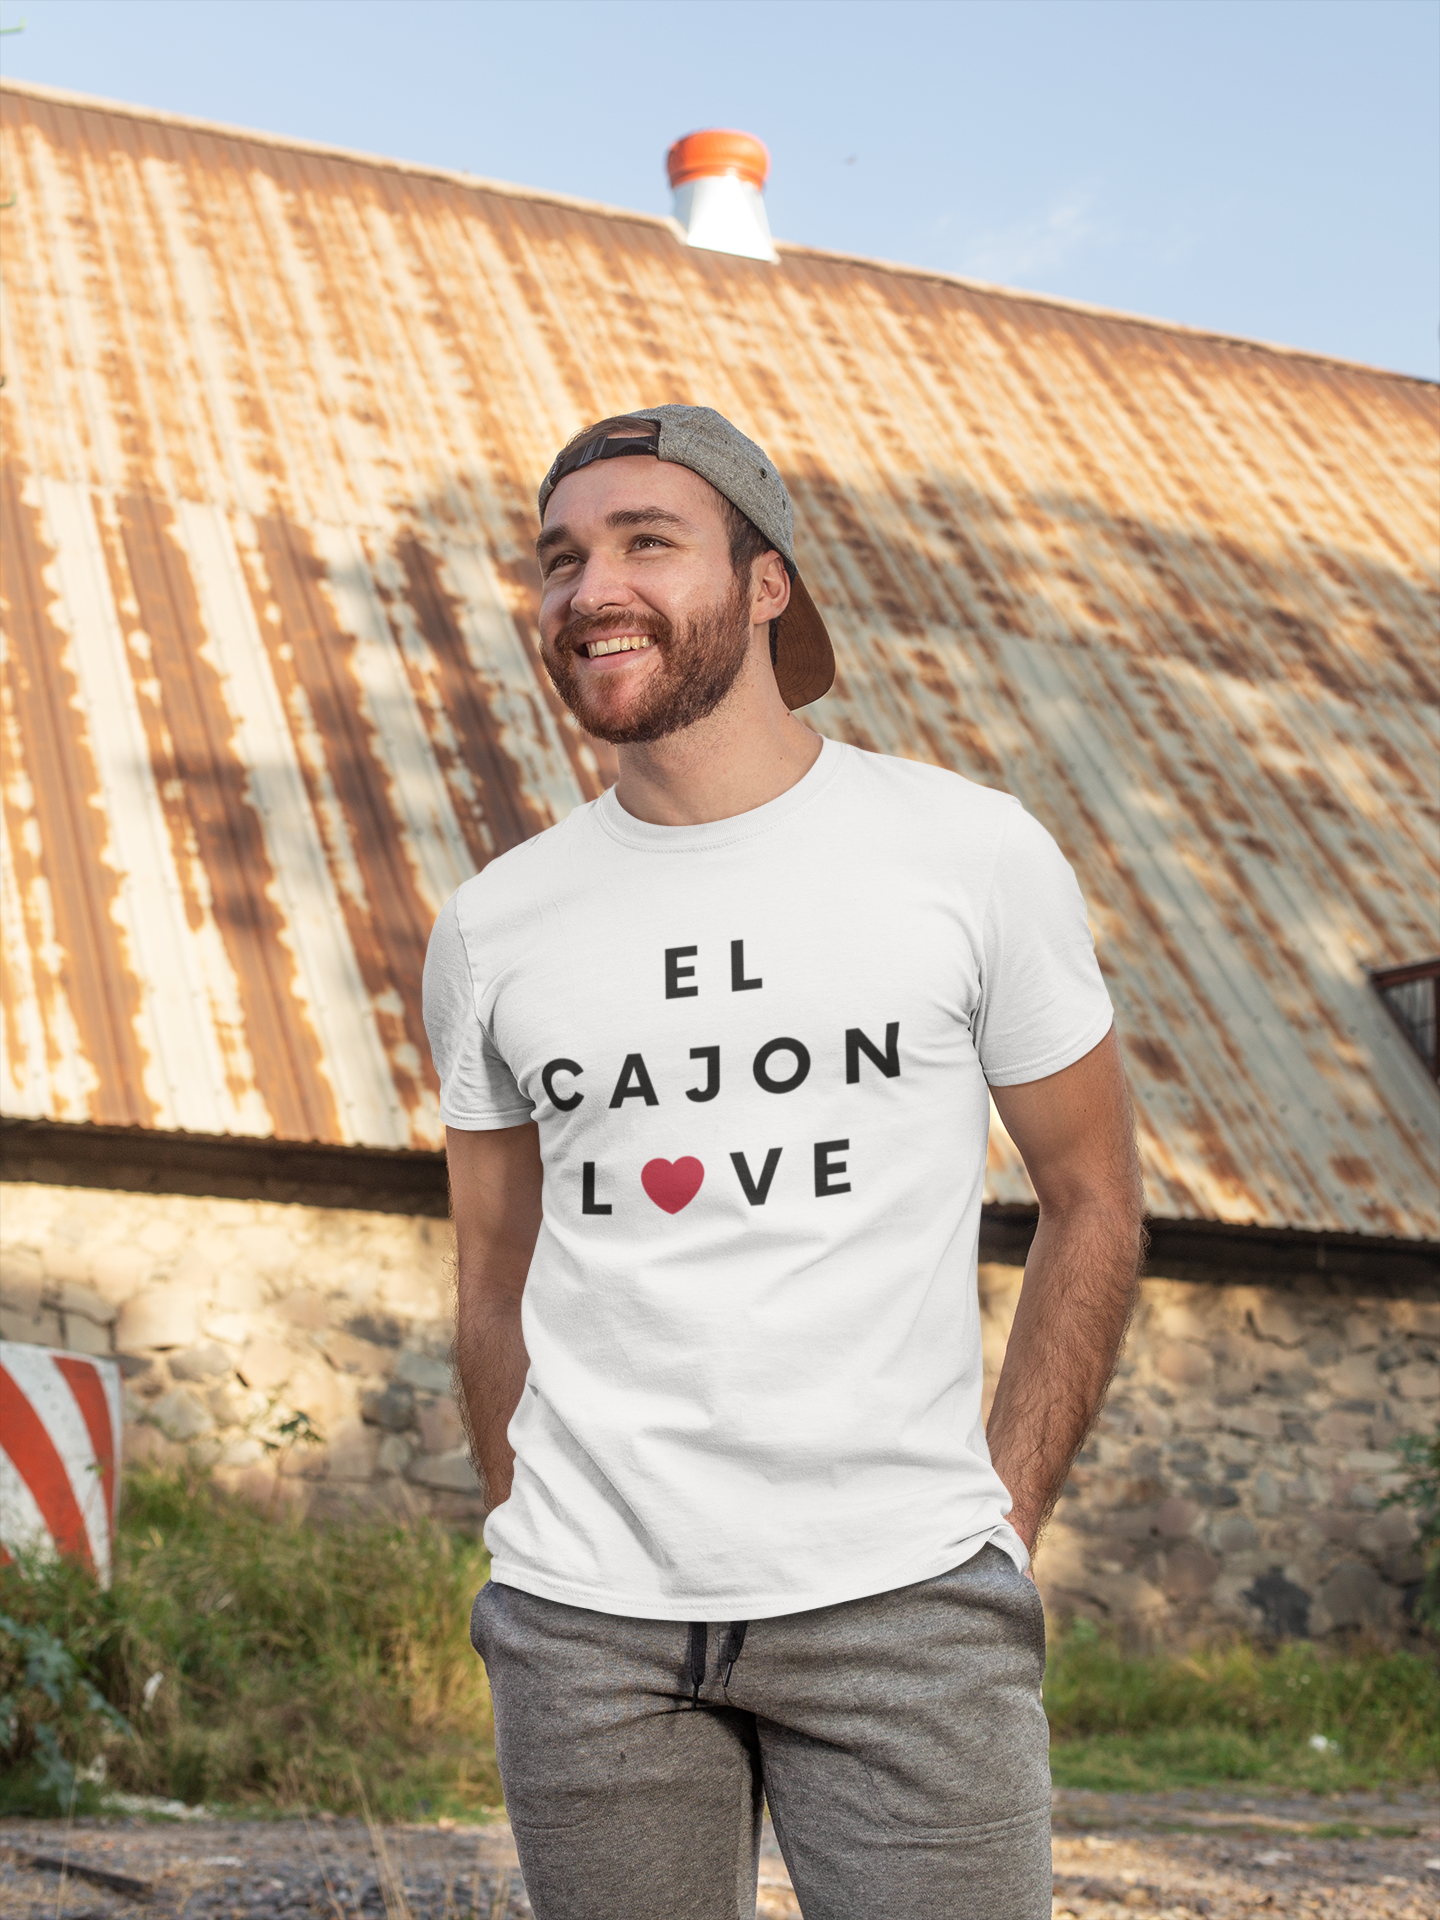 Happy man standing in front of old building wearing an El Cajon lovr t-shirt.